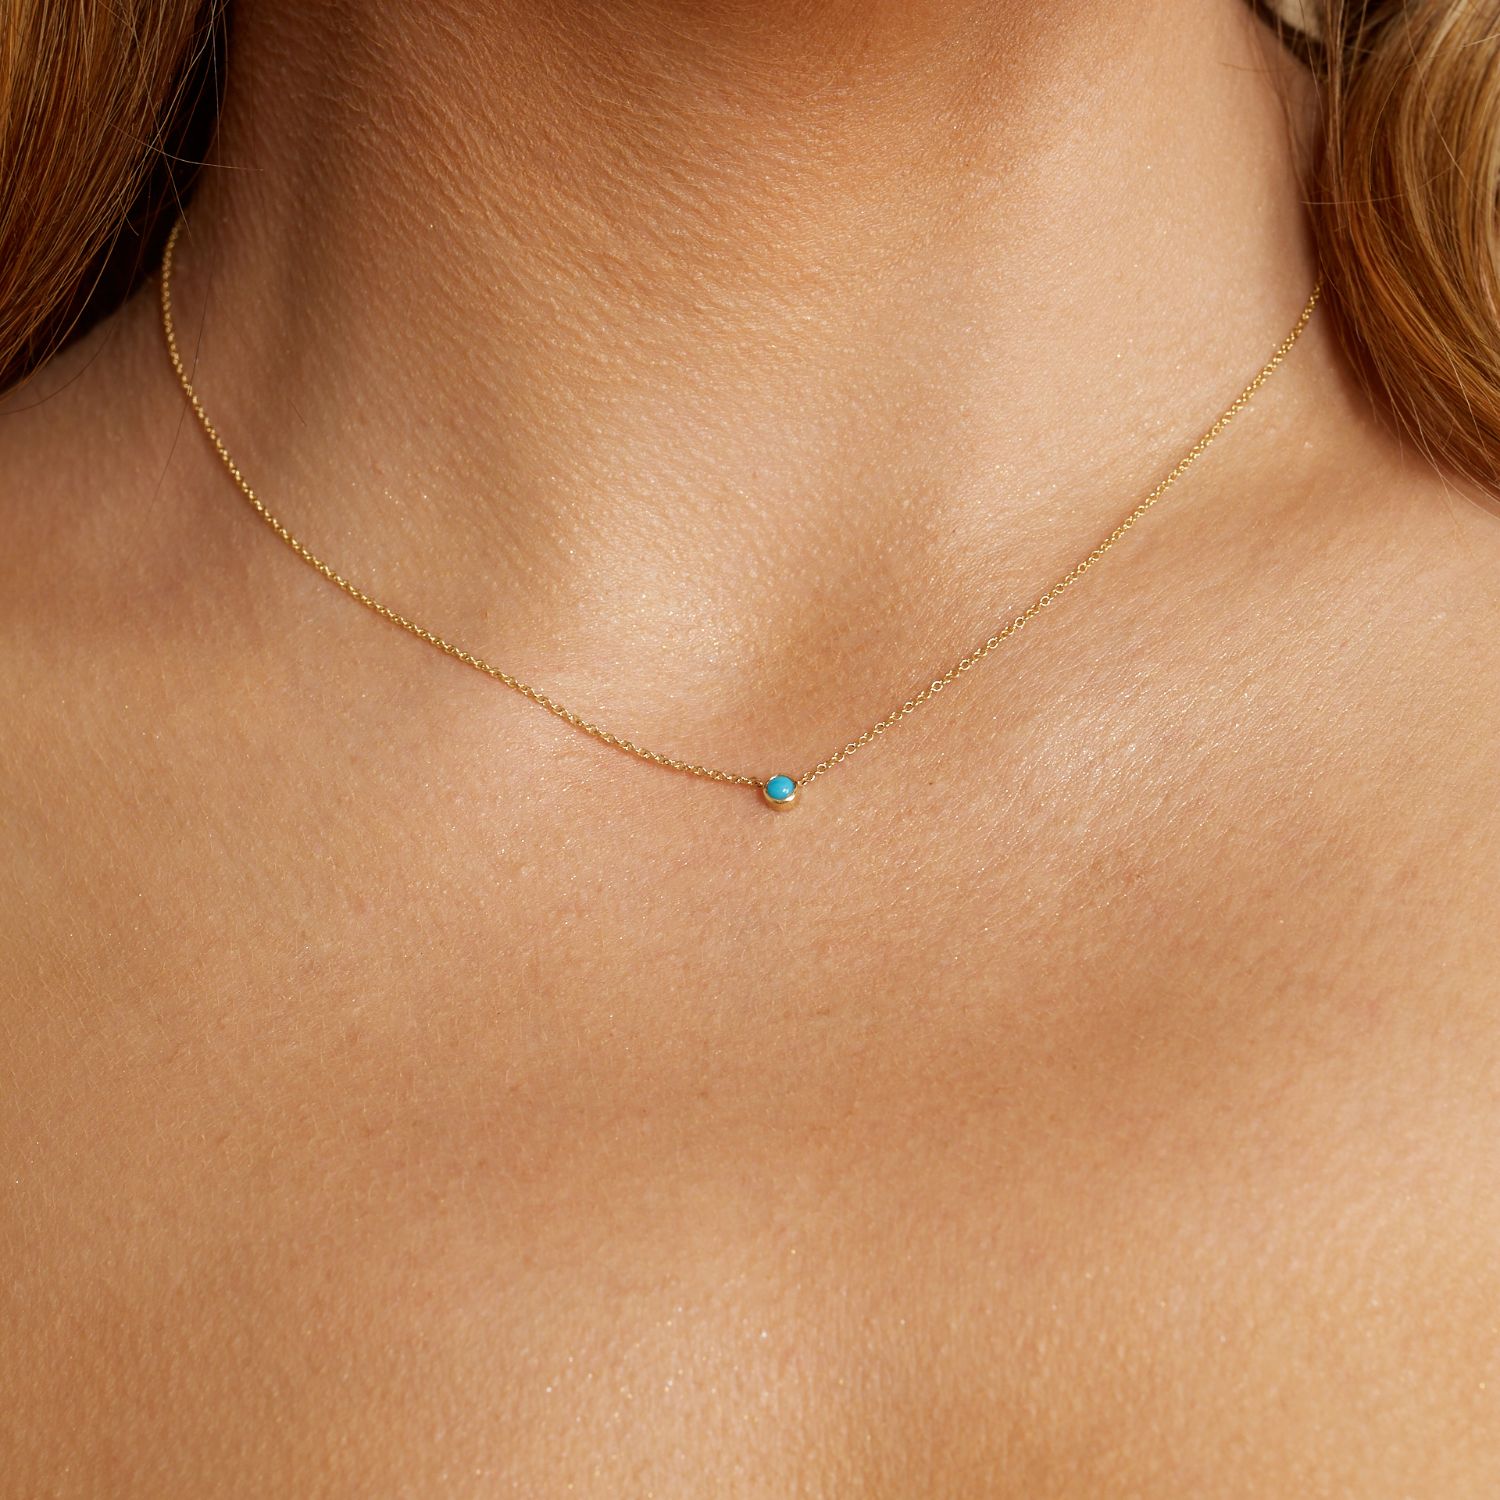 Buy Ratnagarbha Turquoise Chips Necklace, 2 Layer Turquoise Necklace, Dainty  Layering Necklace, Turquoise Jewelry, Turquoise Choker, Birthday Gift,  Bridal Party Necklace, Dainty Turquoise Necklace at Amazon.in